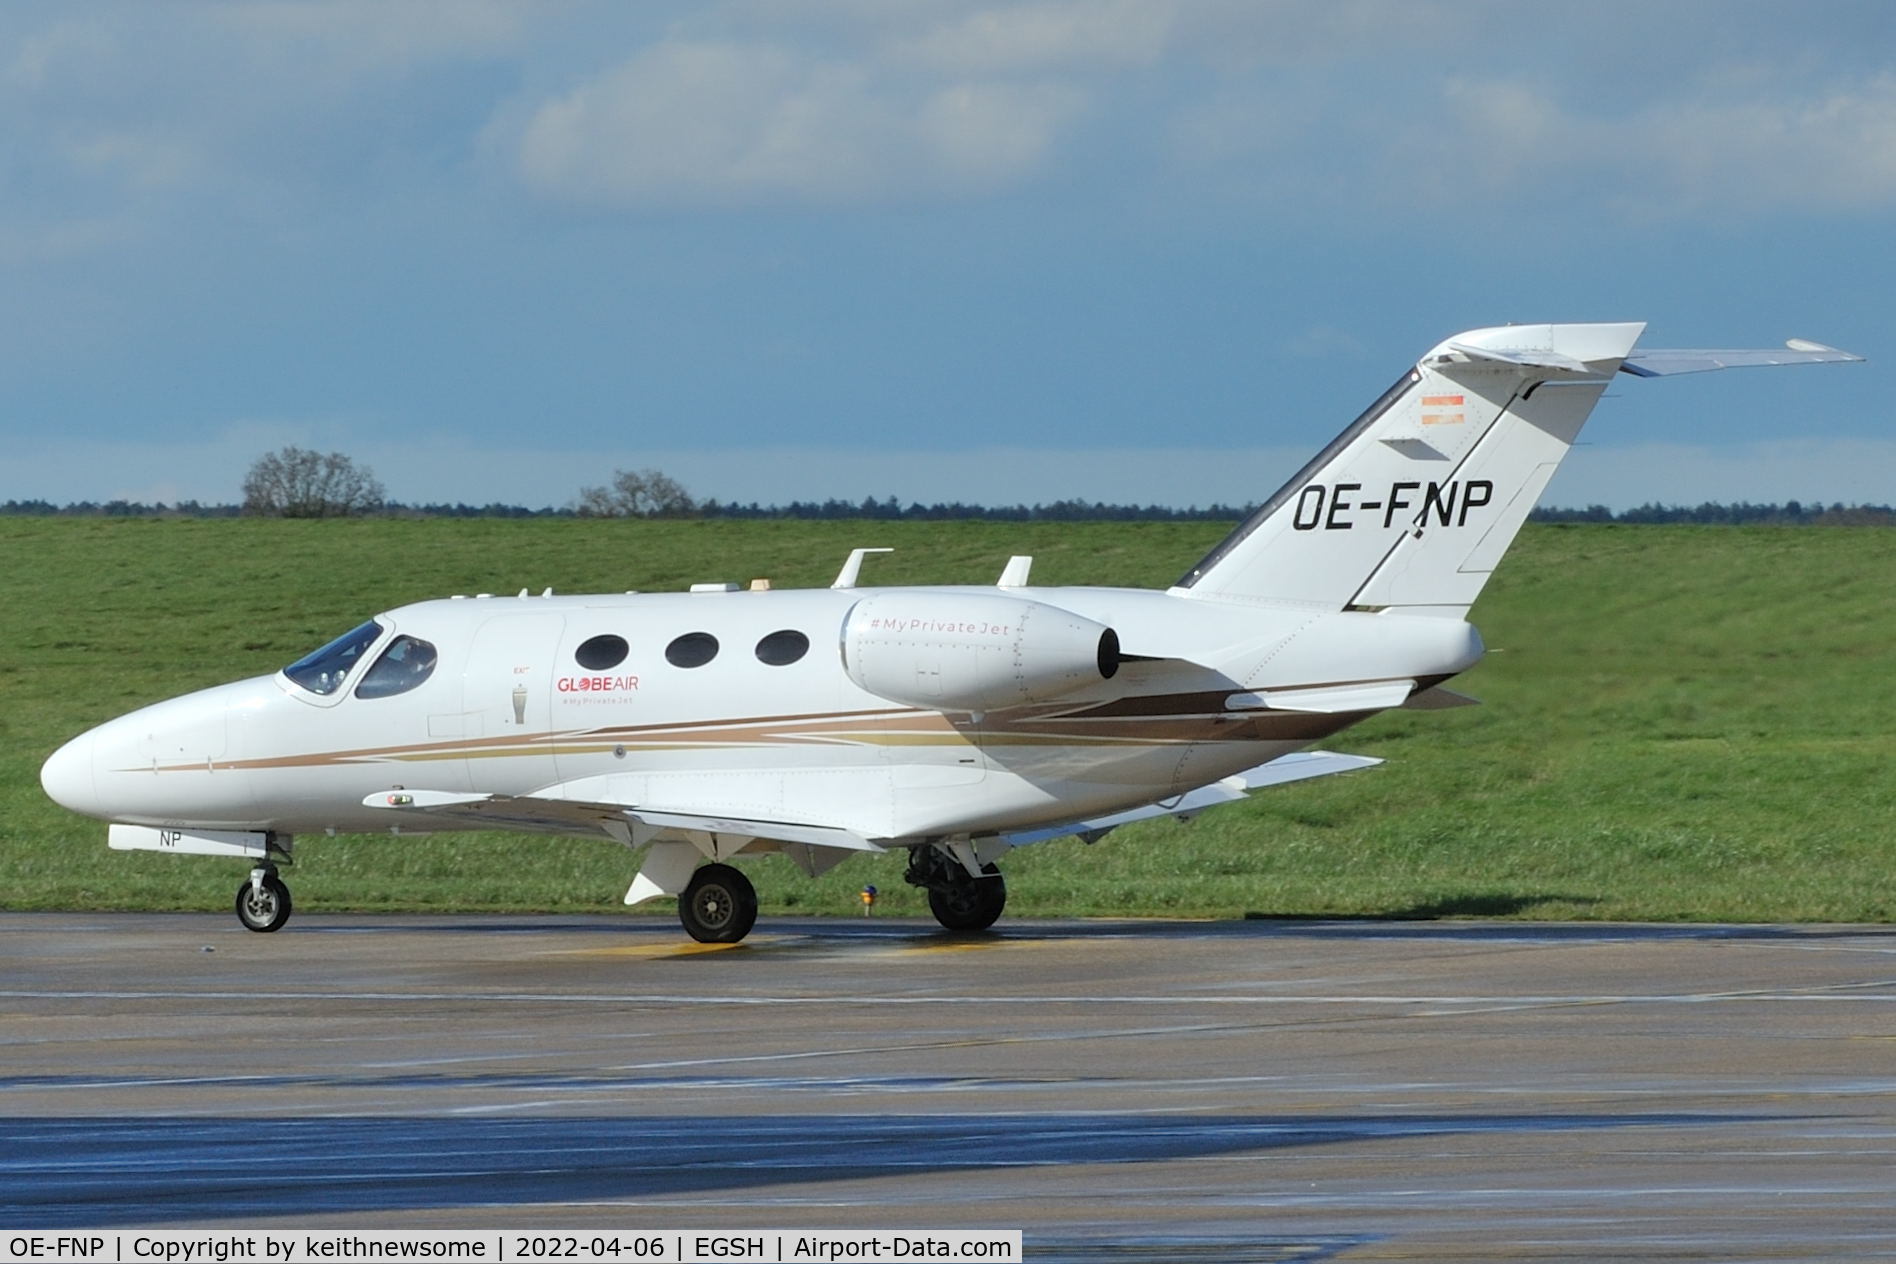 OE-FNP, 2009 Cessna 510 Citation Mustang Citation Mustang C/N 510-0185, Arriving at Norwich from London City Airport.